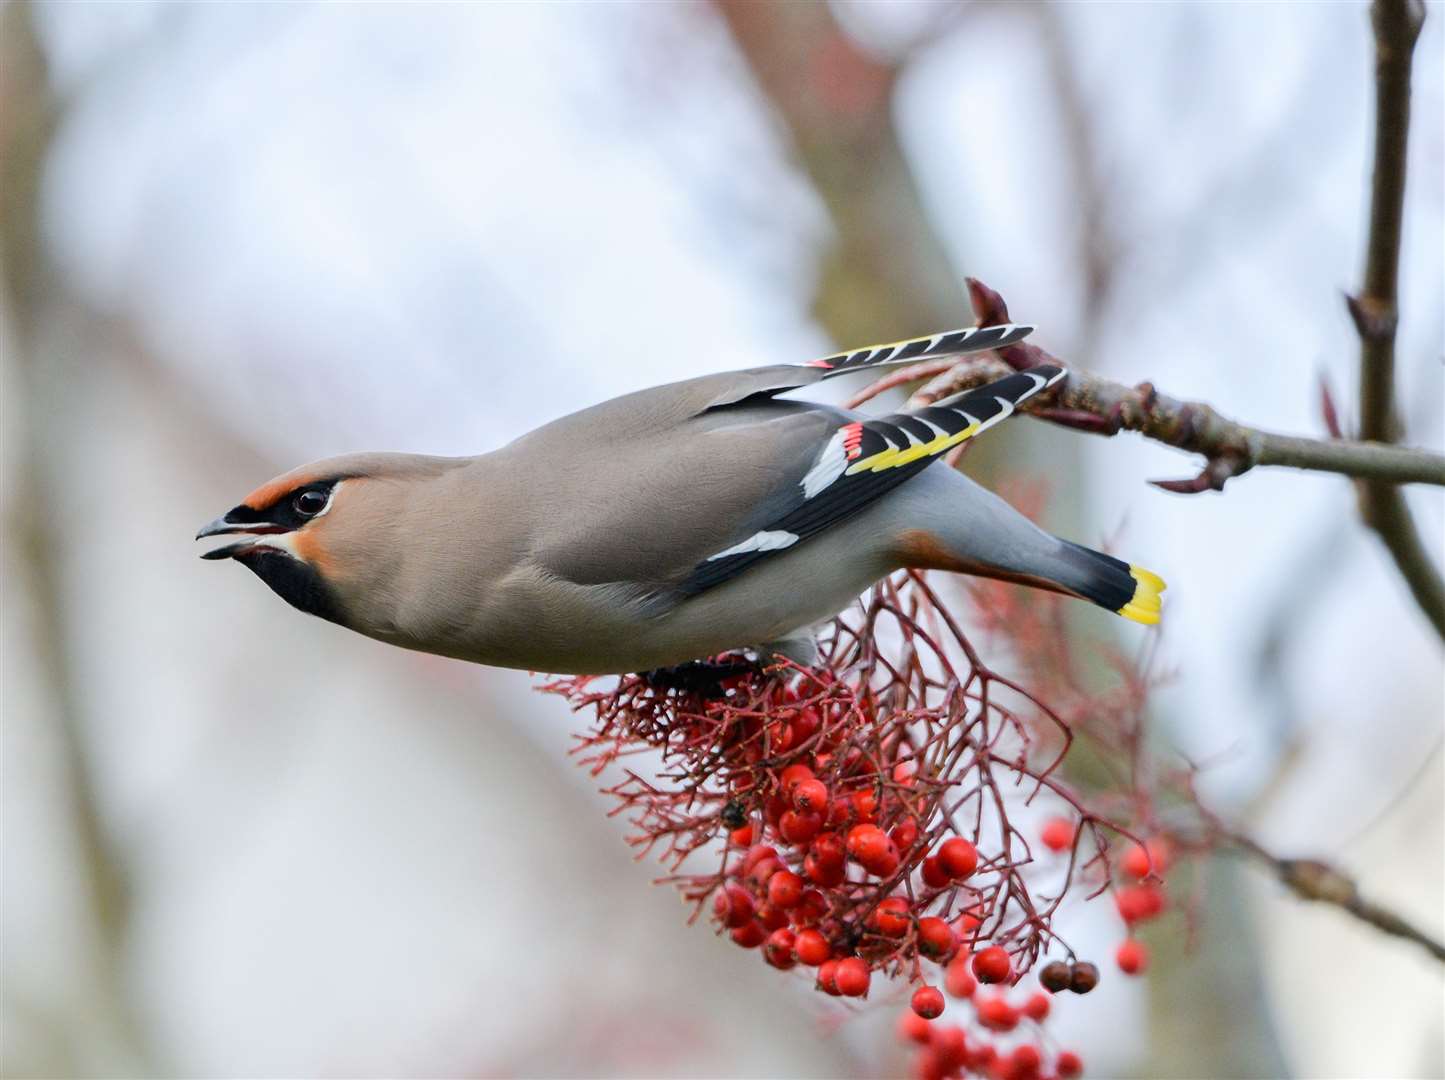 The waxwings' visit has given the opportunity for some beautiful photography. Photo Paul Turner